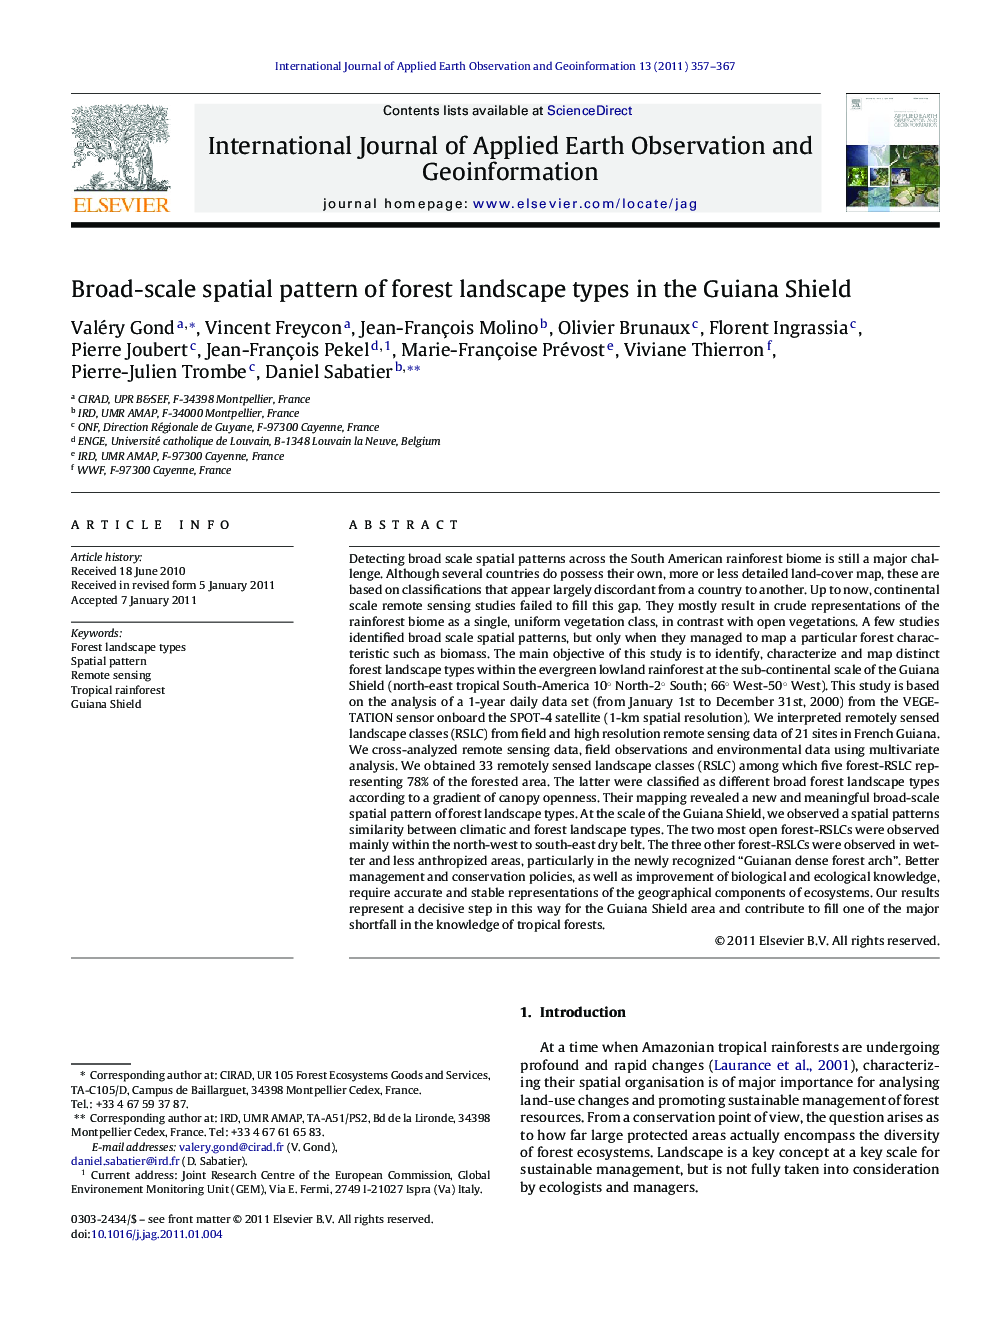 Broad-scale spatial pattern of forest landscape types in the Guiana Shield